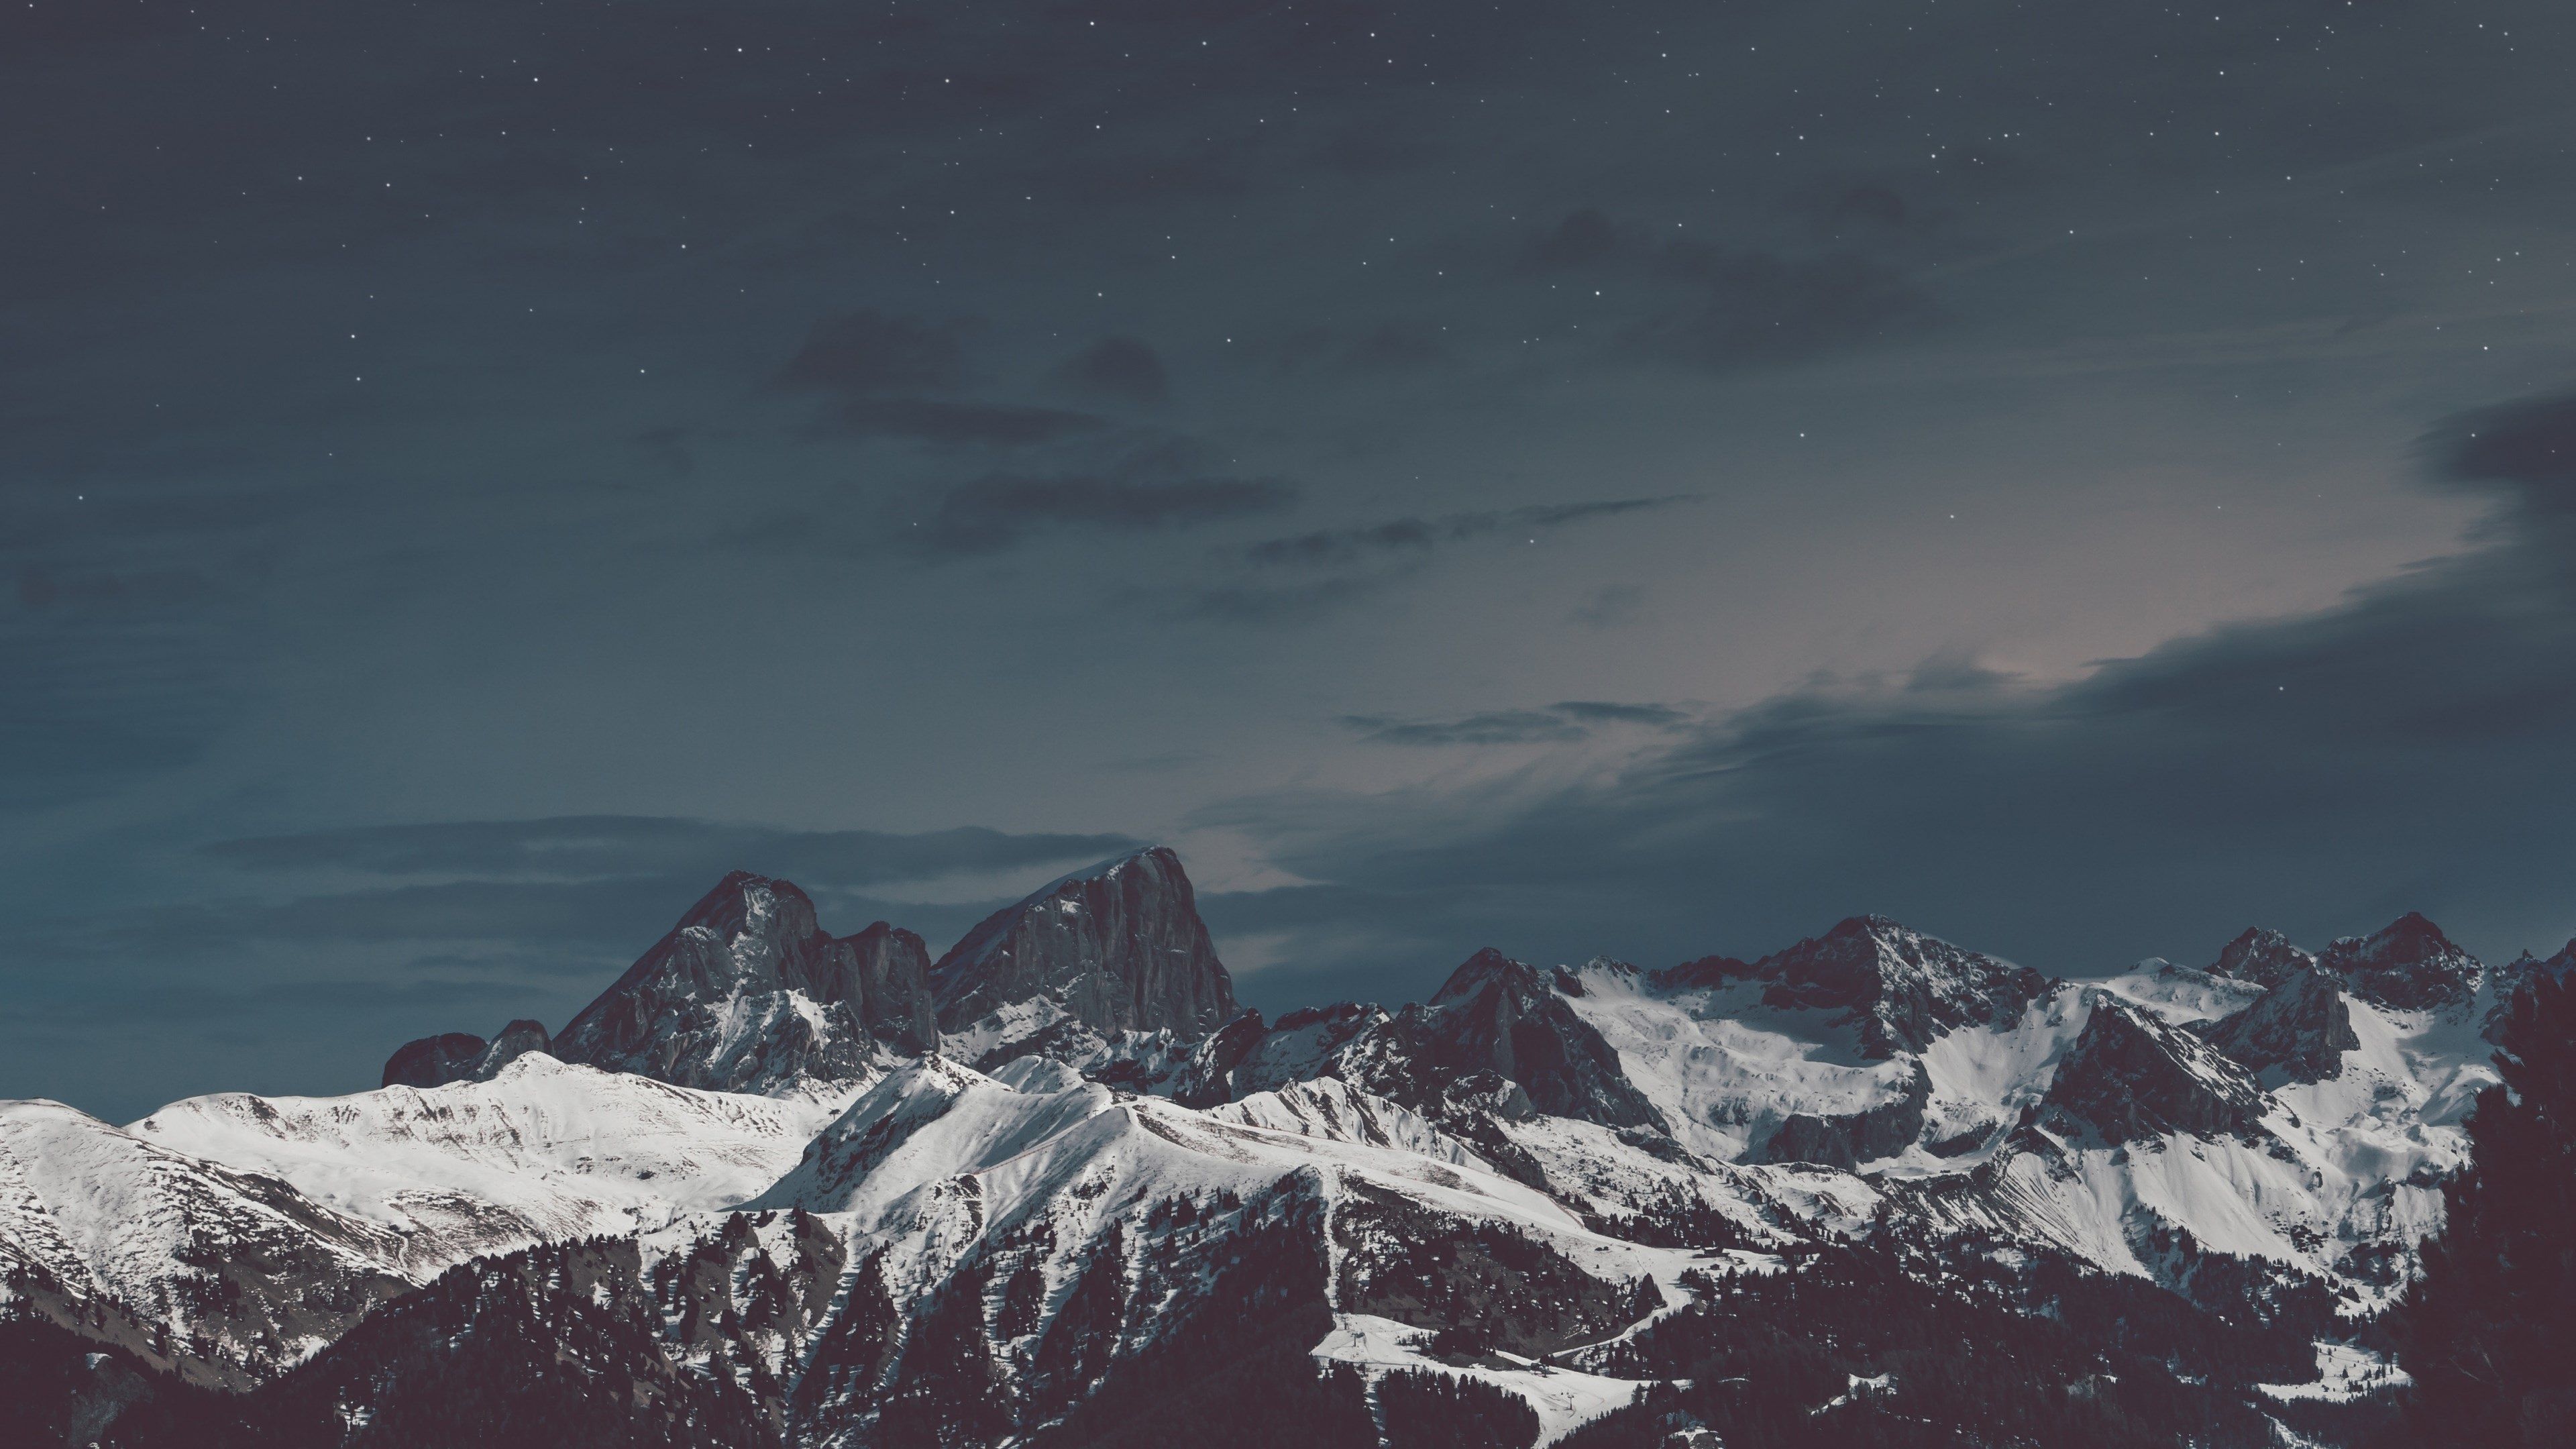 A snow-covered mountain range under a starry sky - Mountain